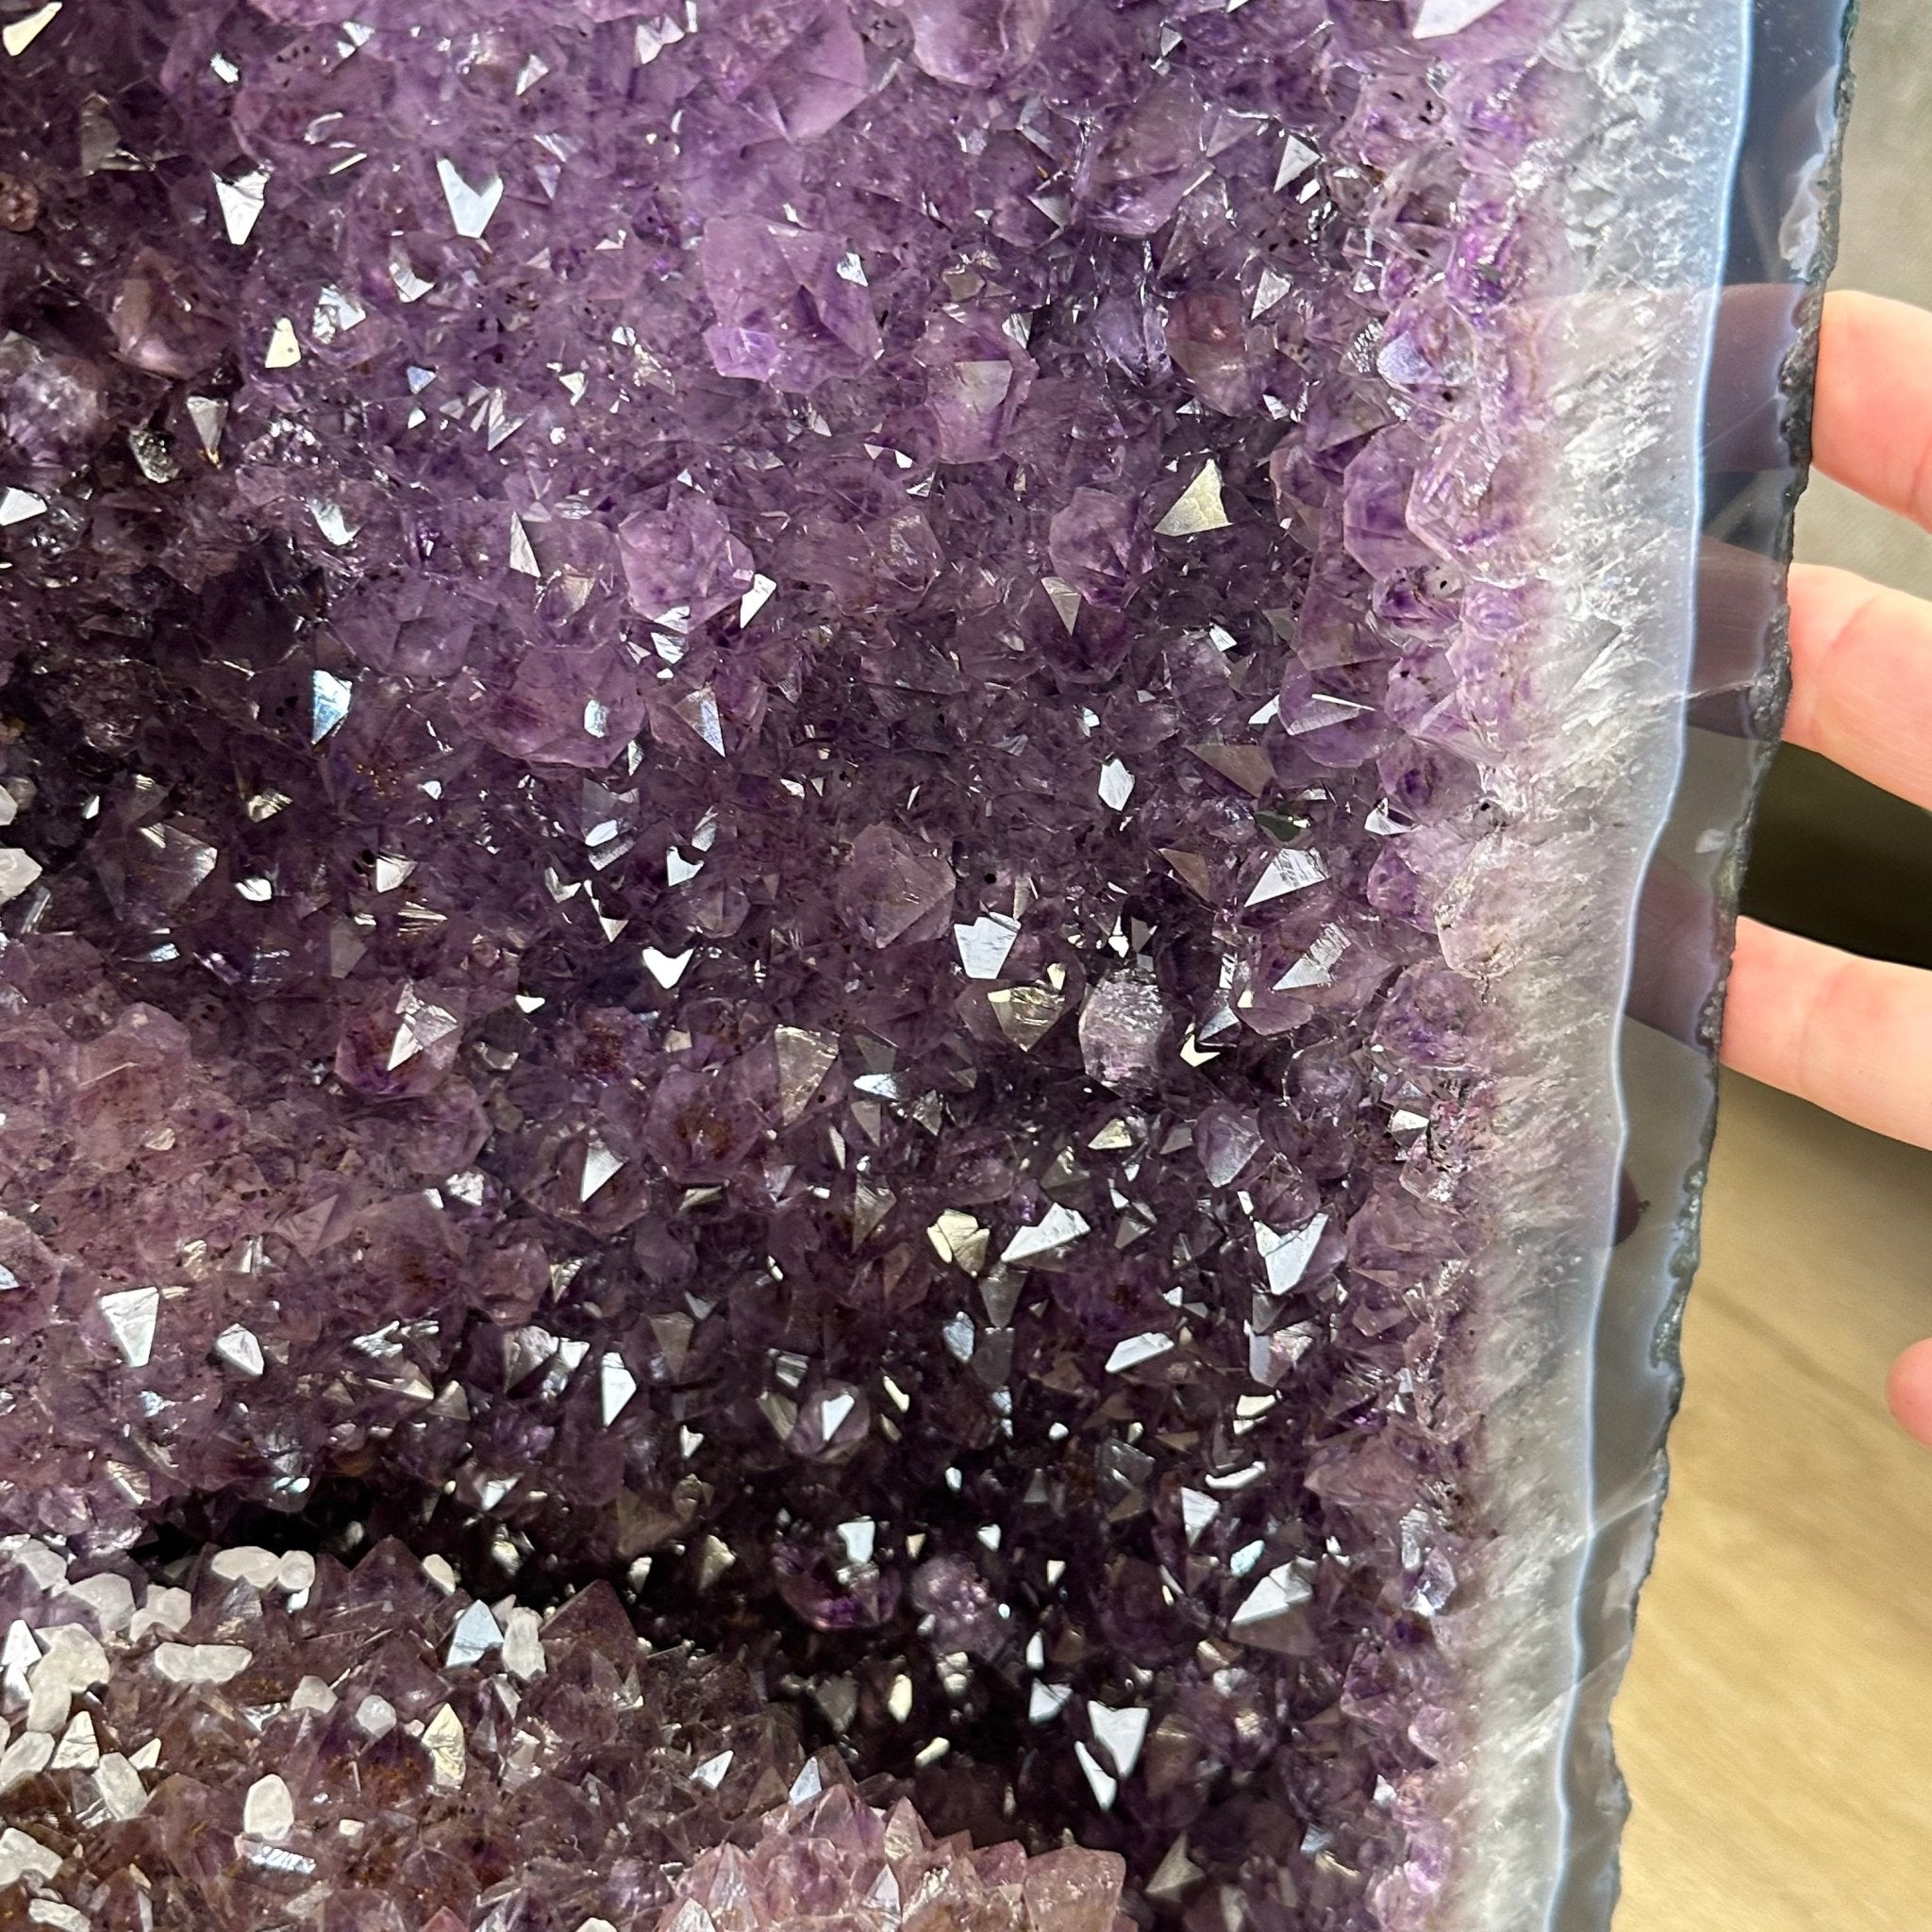 Extra Quality Brazilian Amethyst Cathedral, 125.6 lbs & 41" Tall, Model #5601-1238 by Brazil Gems - Brazil GemsBrazil GemsExtra Quality Brazilian Amethyst Cathedral, 125.6 lbs & 41" Tall, Model #5601-1238 by Brazil GemsCathedrals5601-1238